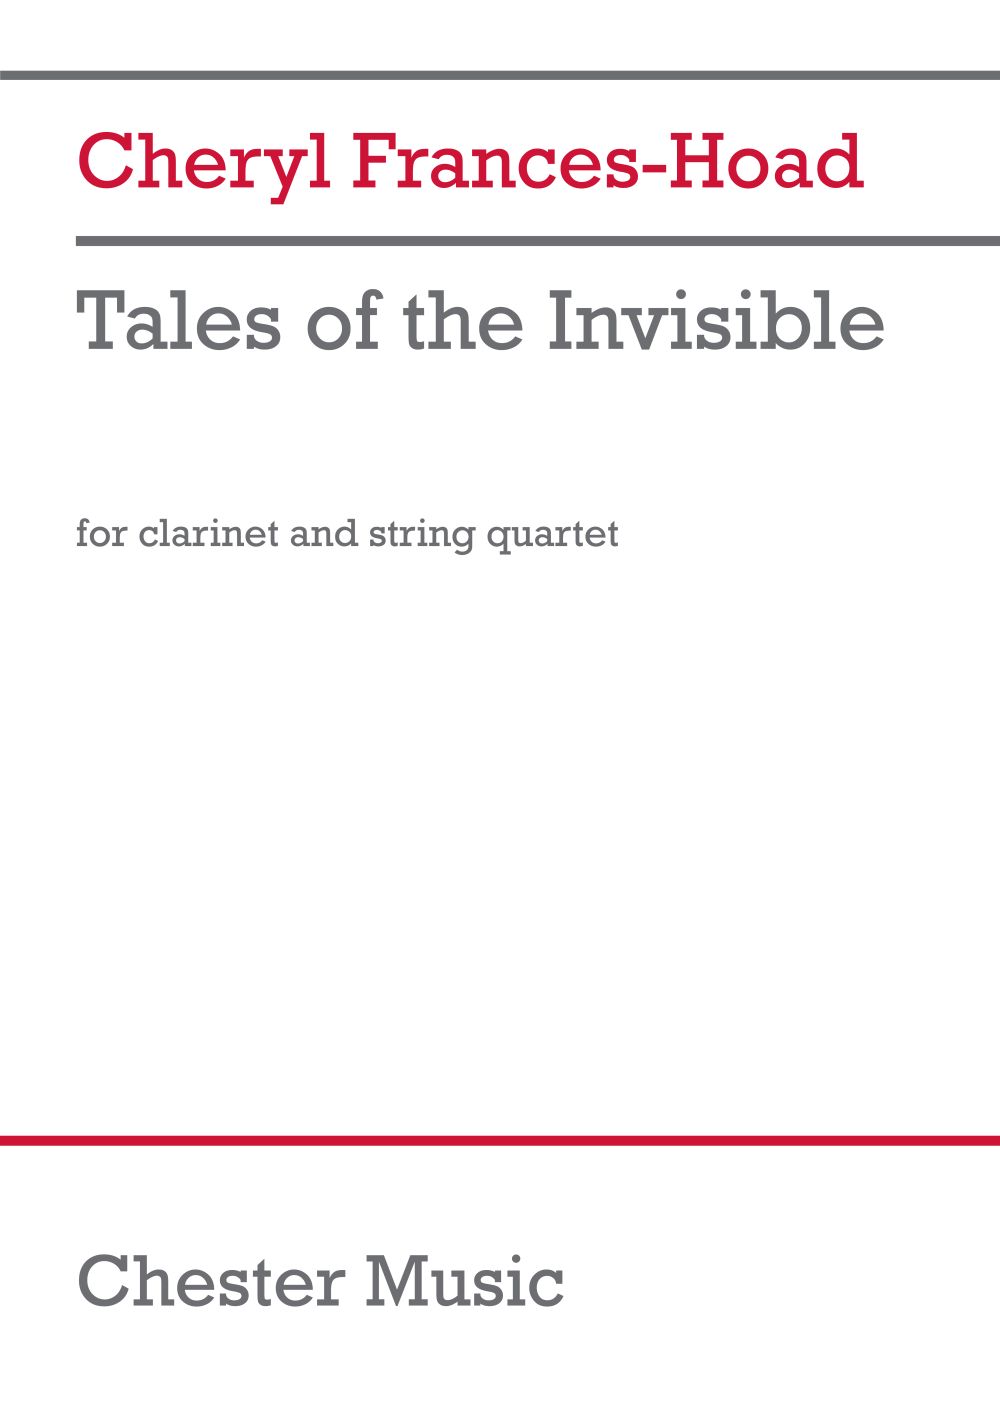 Cheryl Frances-Hoad: Tales of the Invisible: Score/Parts